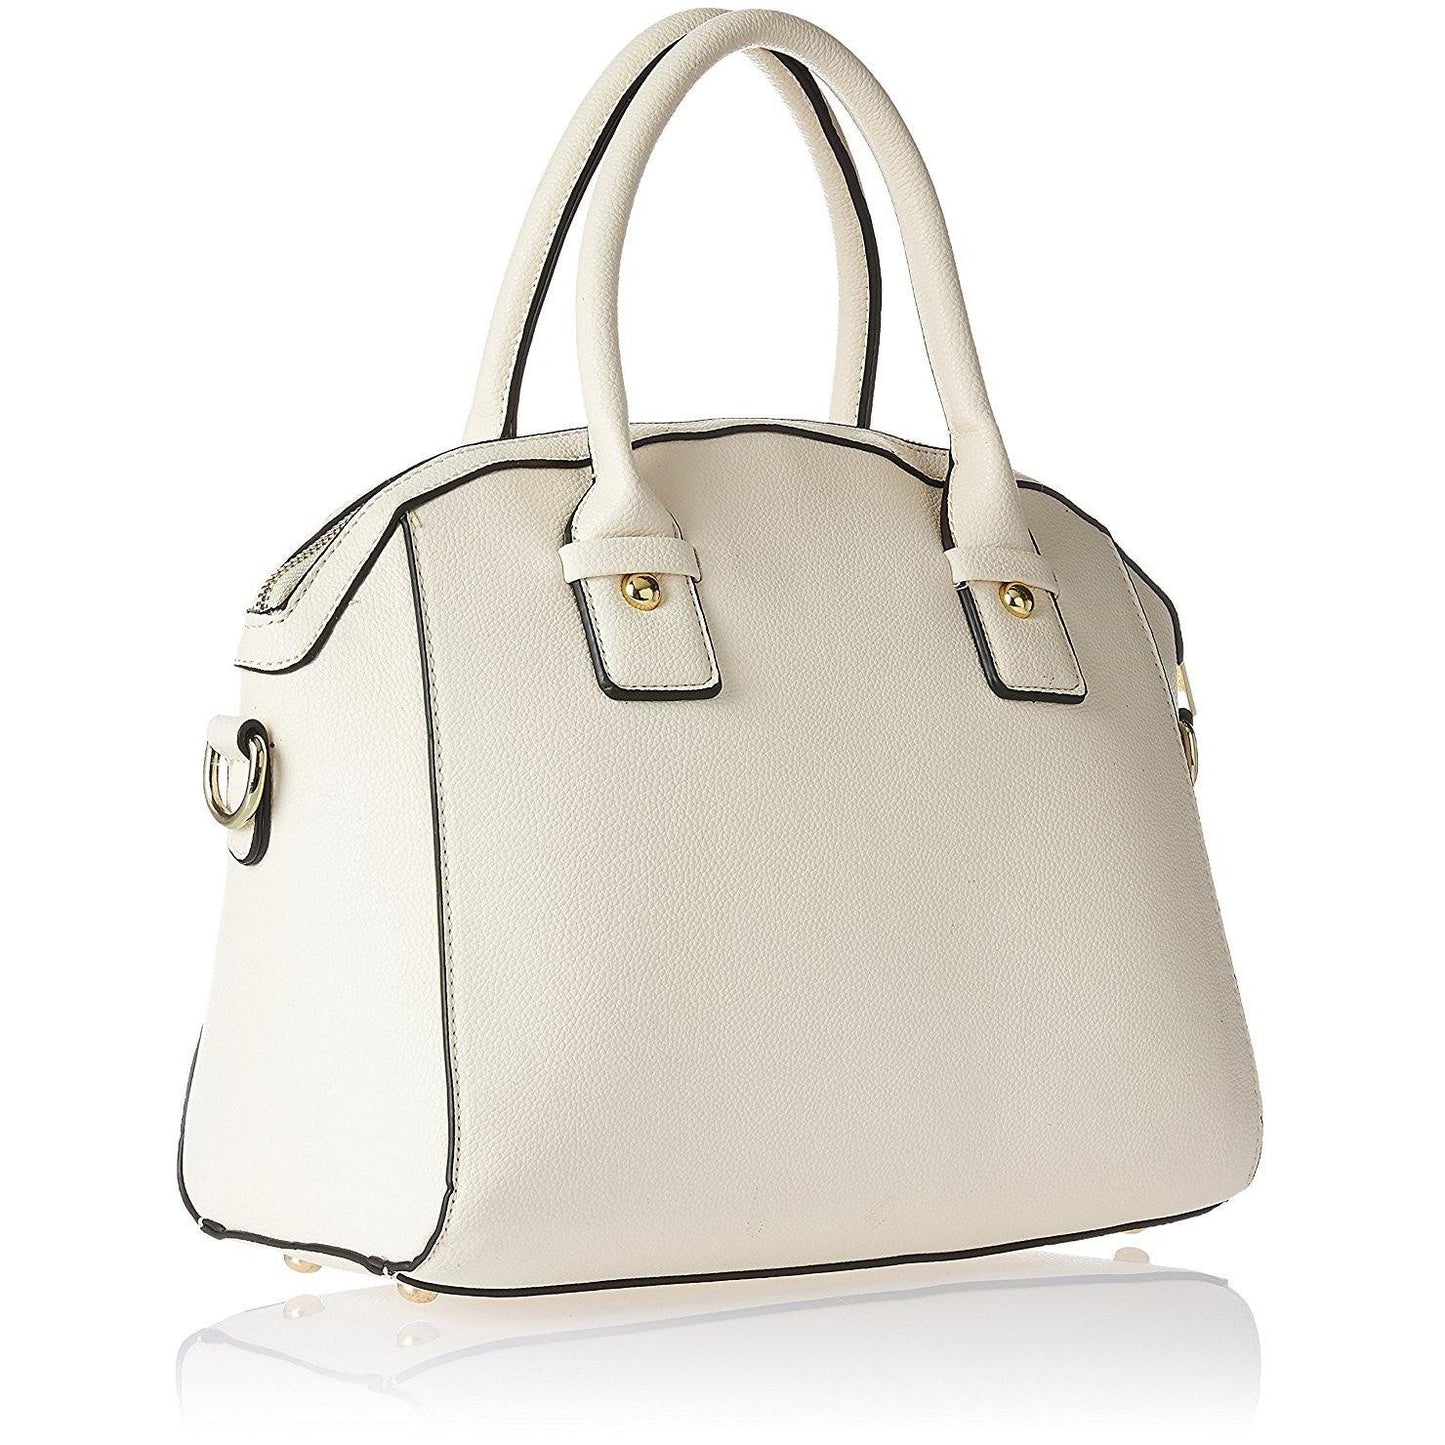 Cathy London Women's Handbag, Material- Synthethic Leather, Colour- Beige